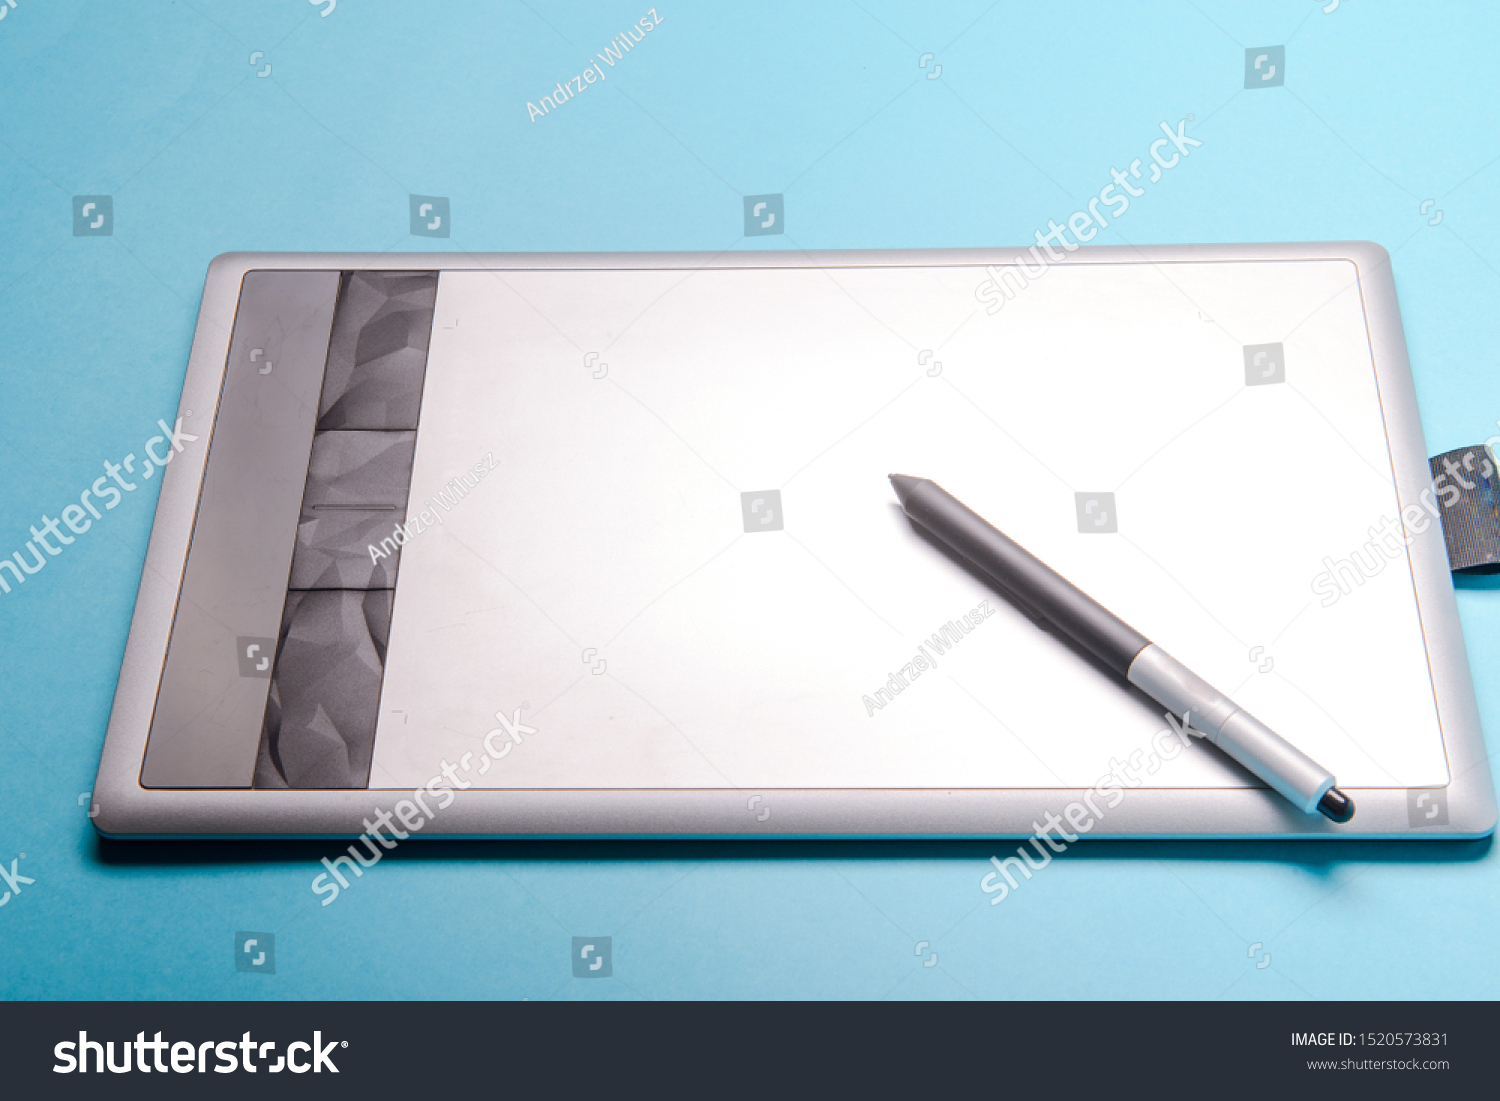 Graphic tablet with pen for illustrators and designers #1520573831